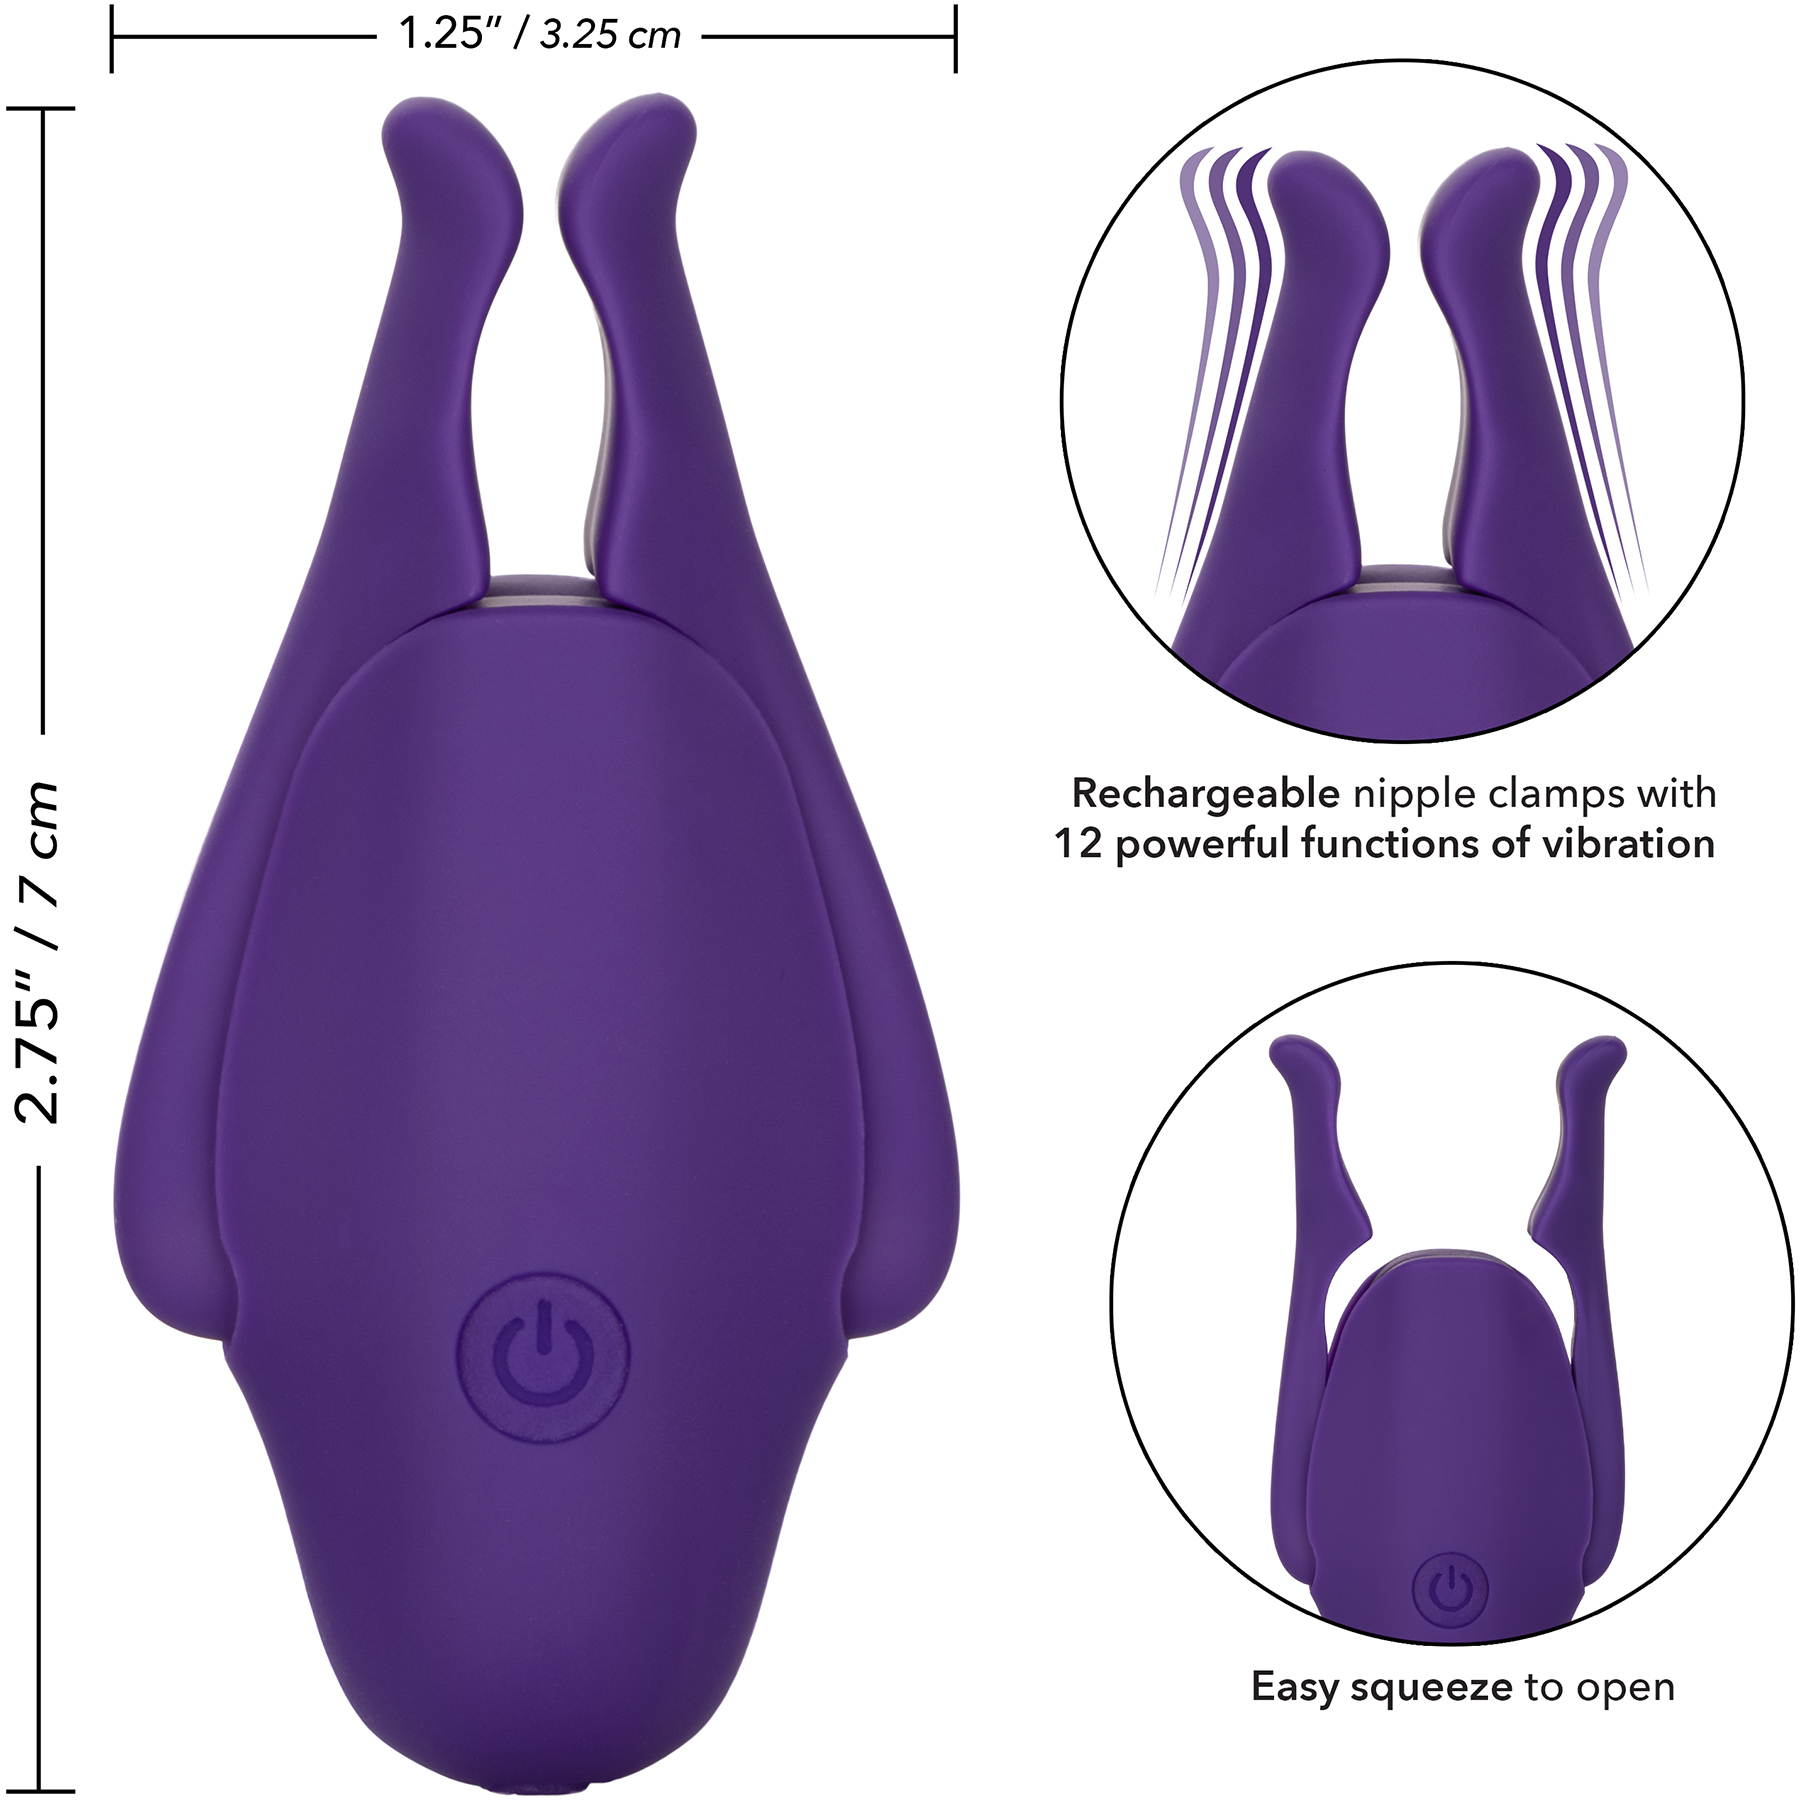 Nipple Play Nipplettes Rechargeable Vibrating Nipple Clamps By CalExotics - Measurements